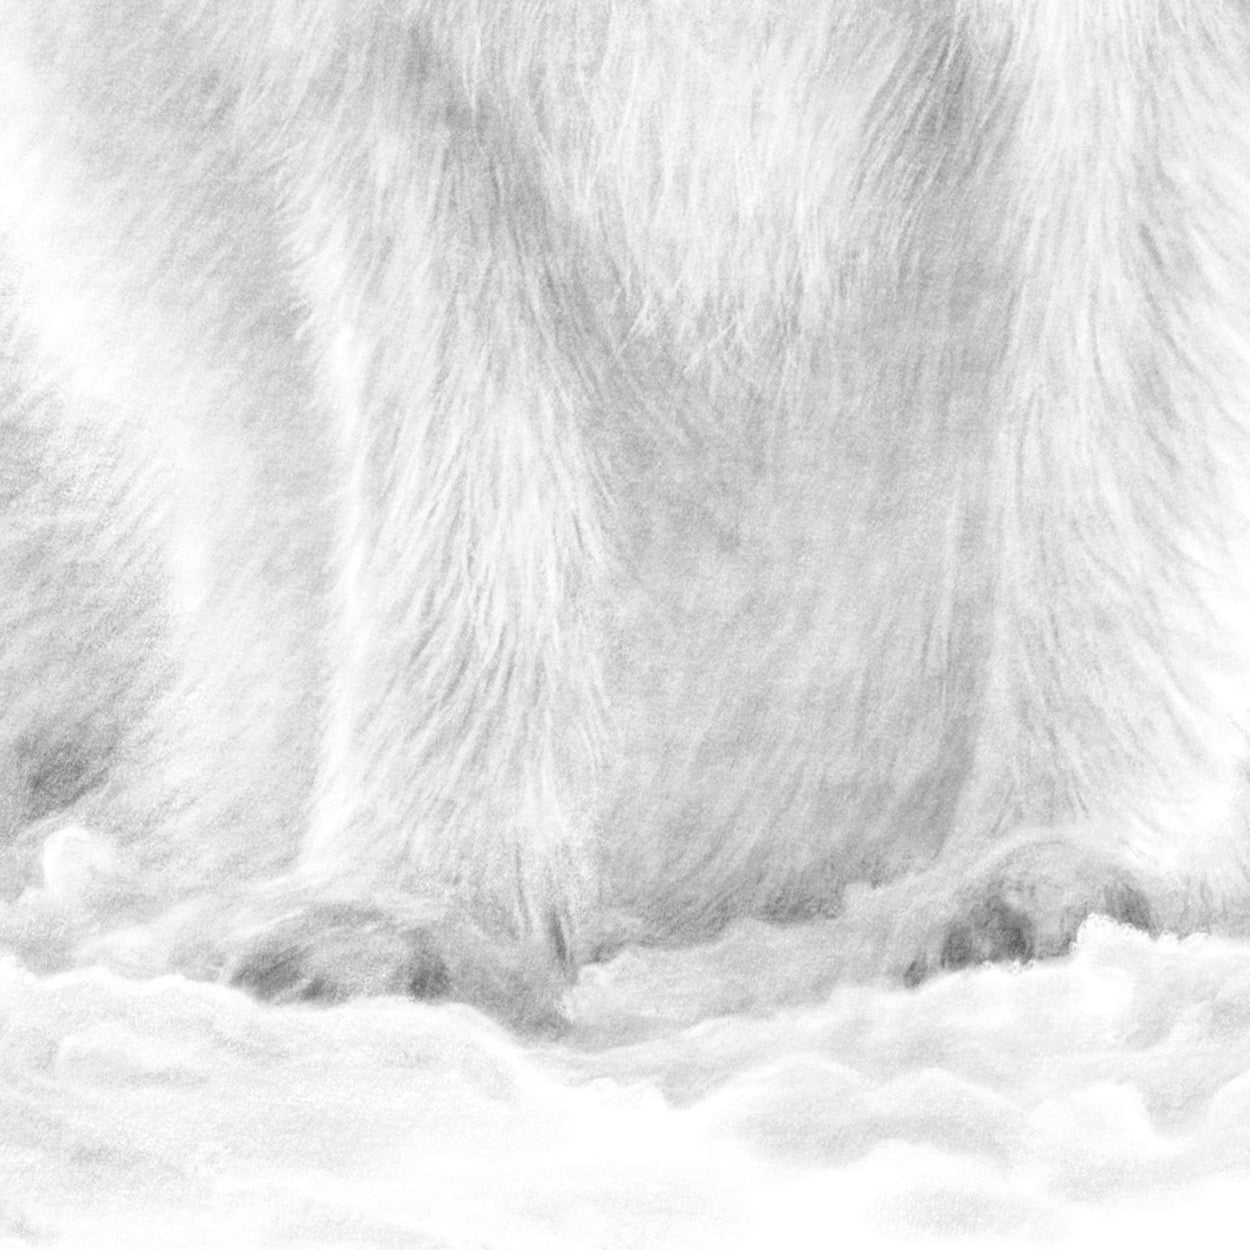 Arctic Fox Drawing Close-up - The Thriving Wild